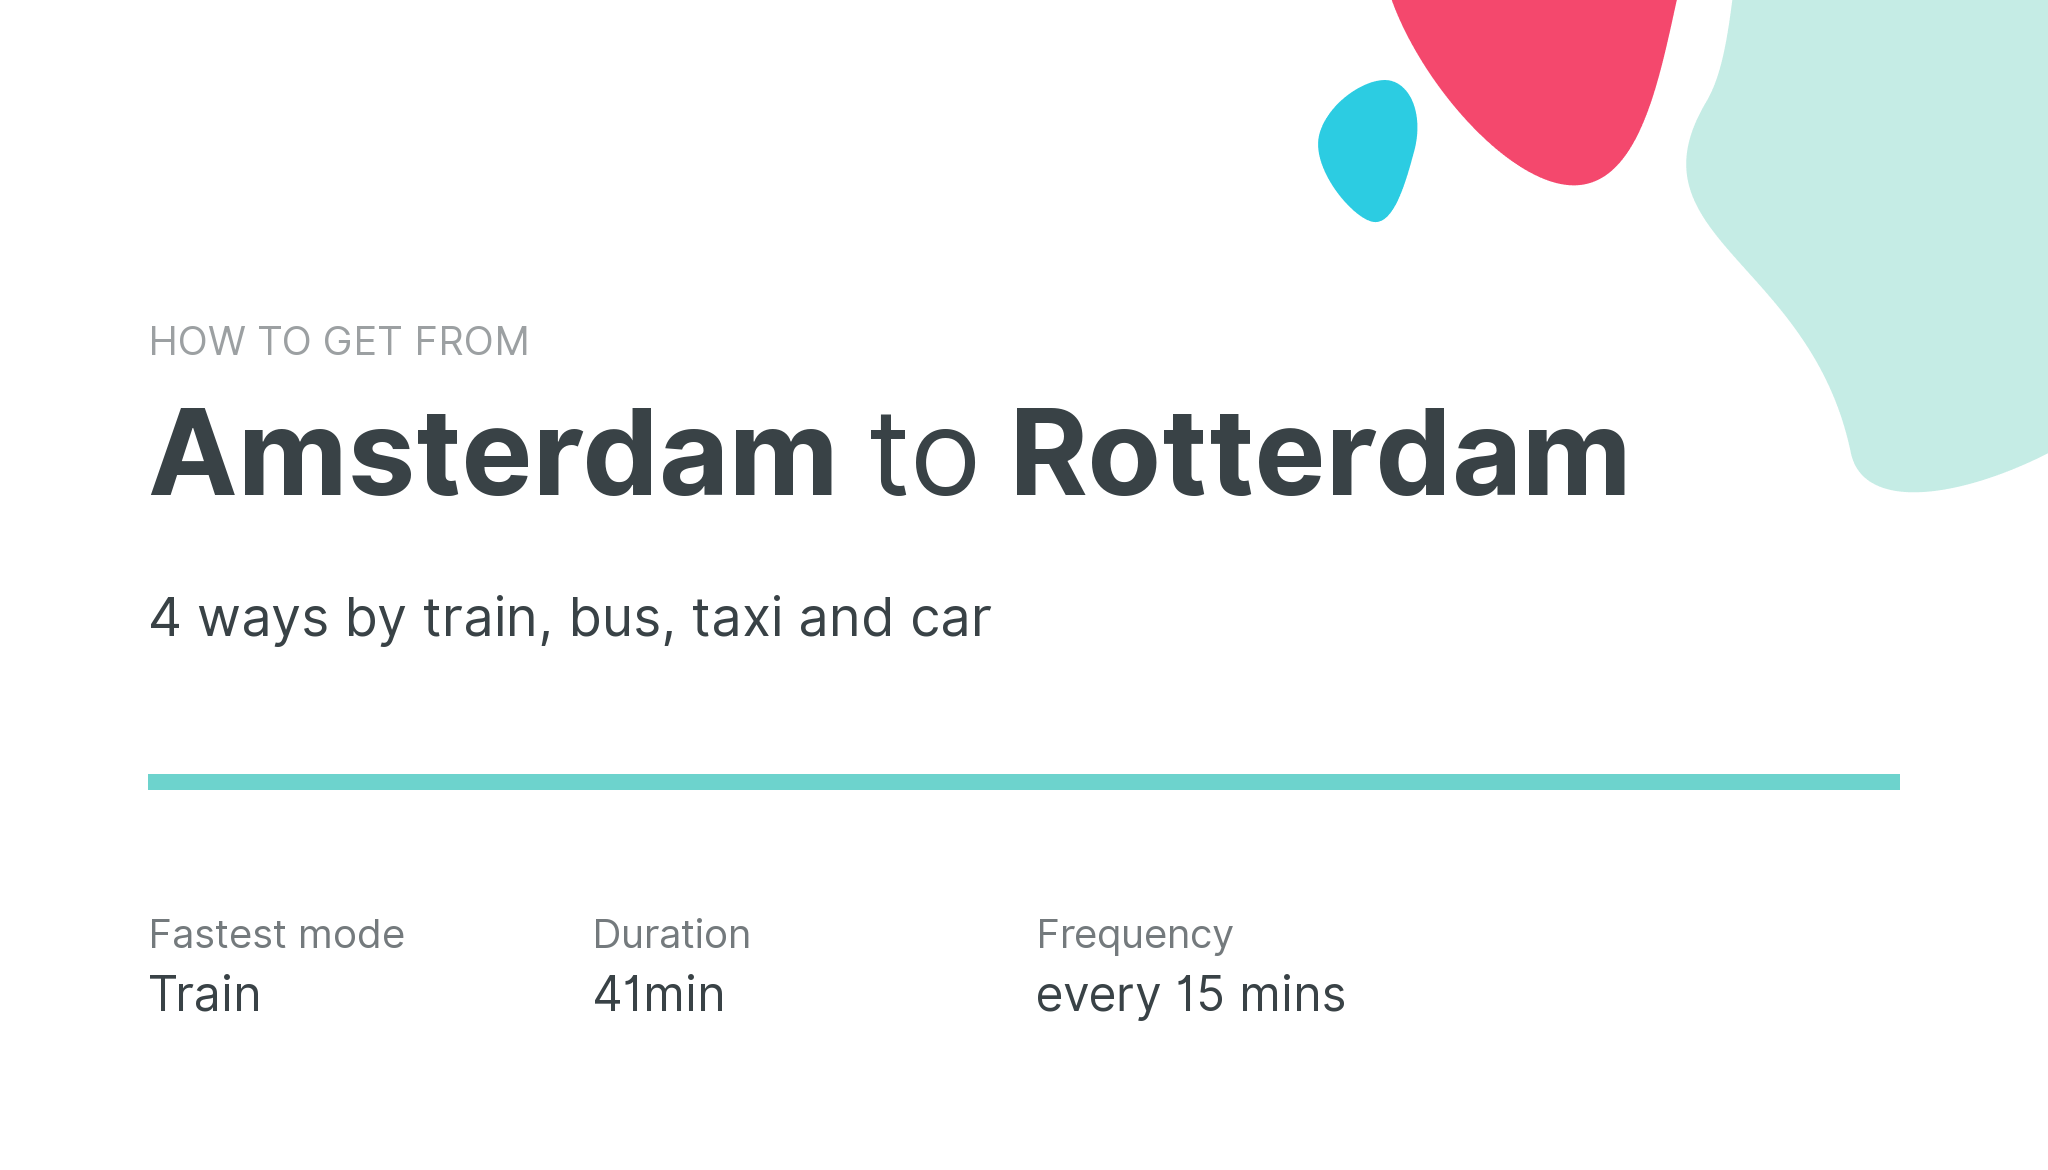 How do I get from Amsterdam to Rotterdam